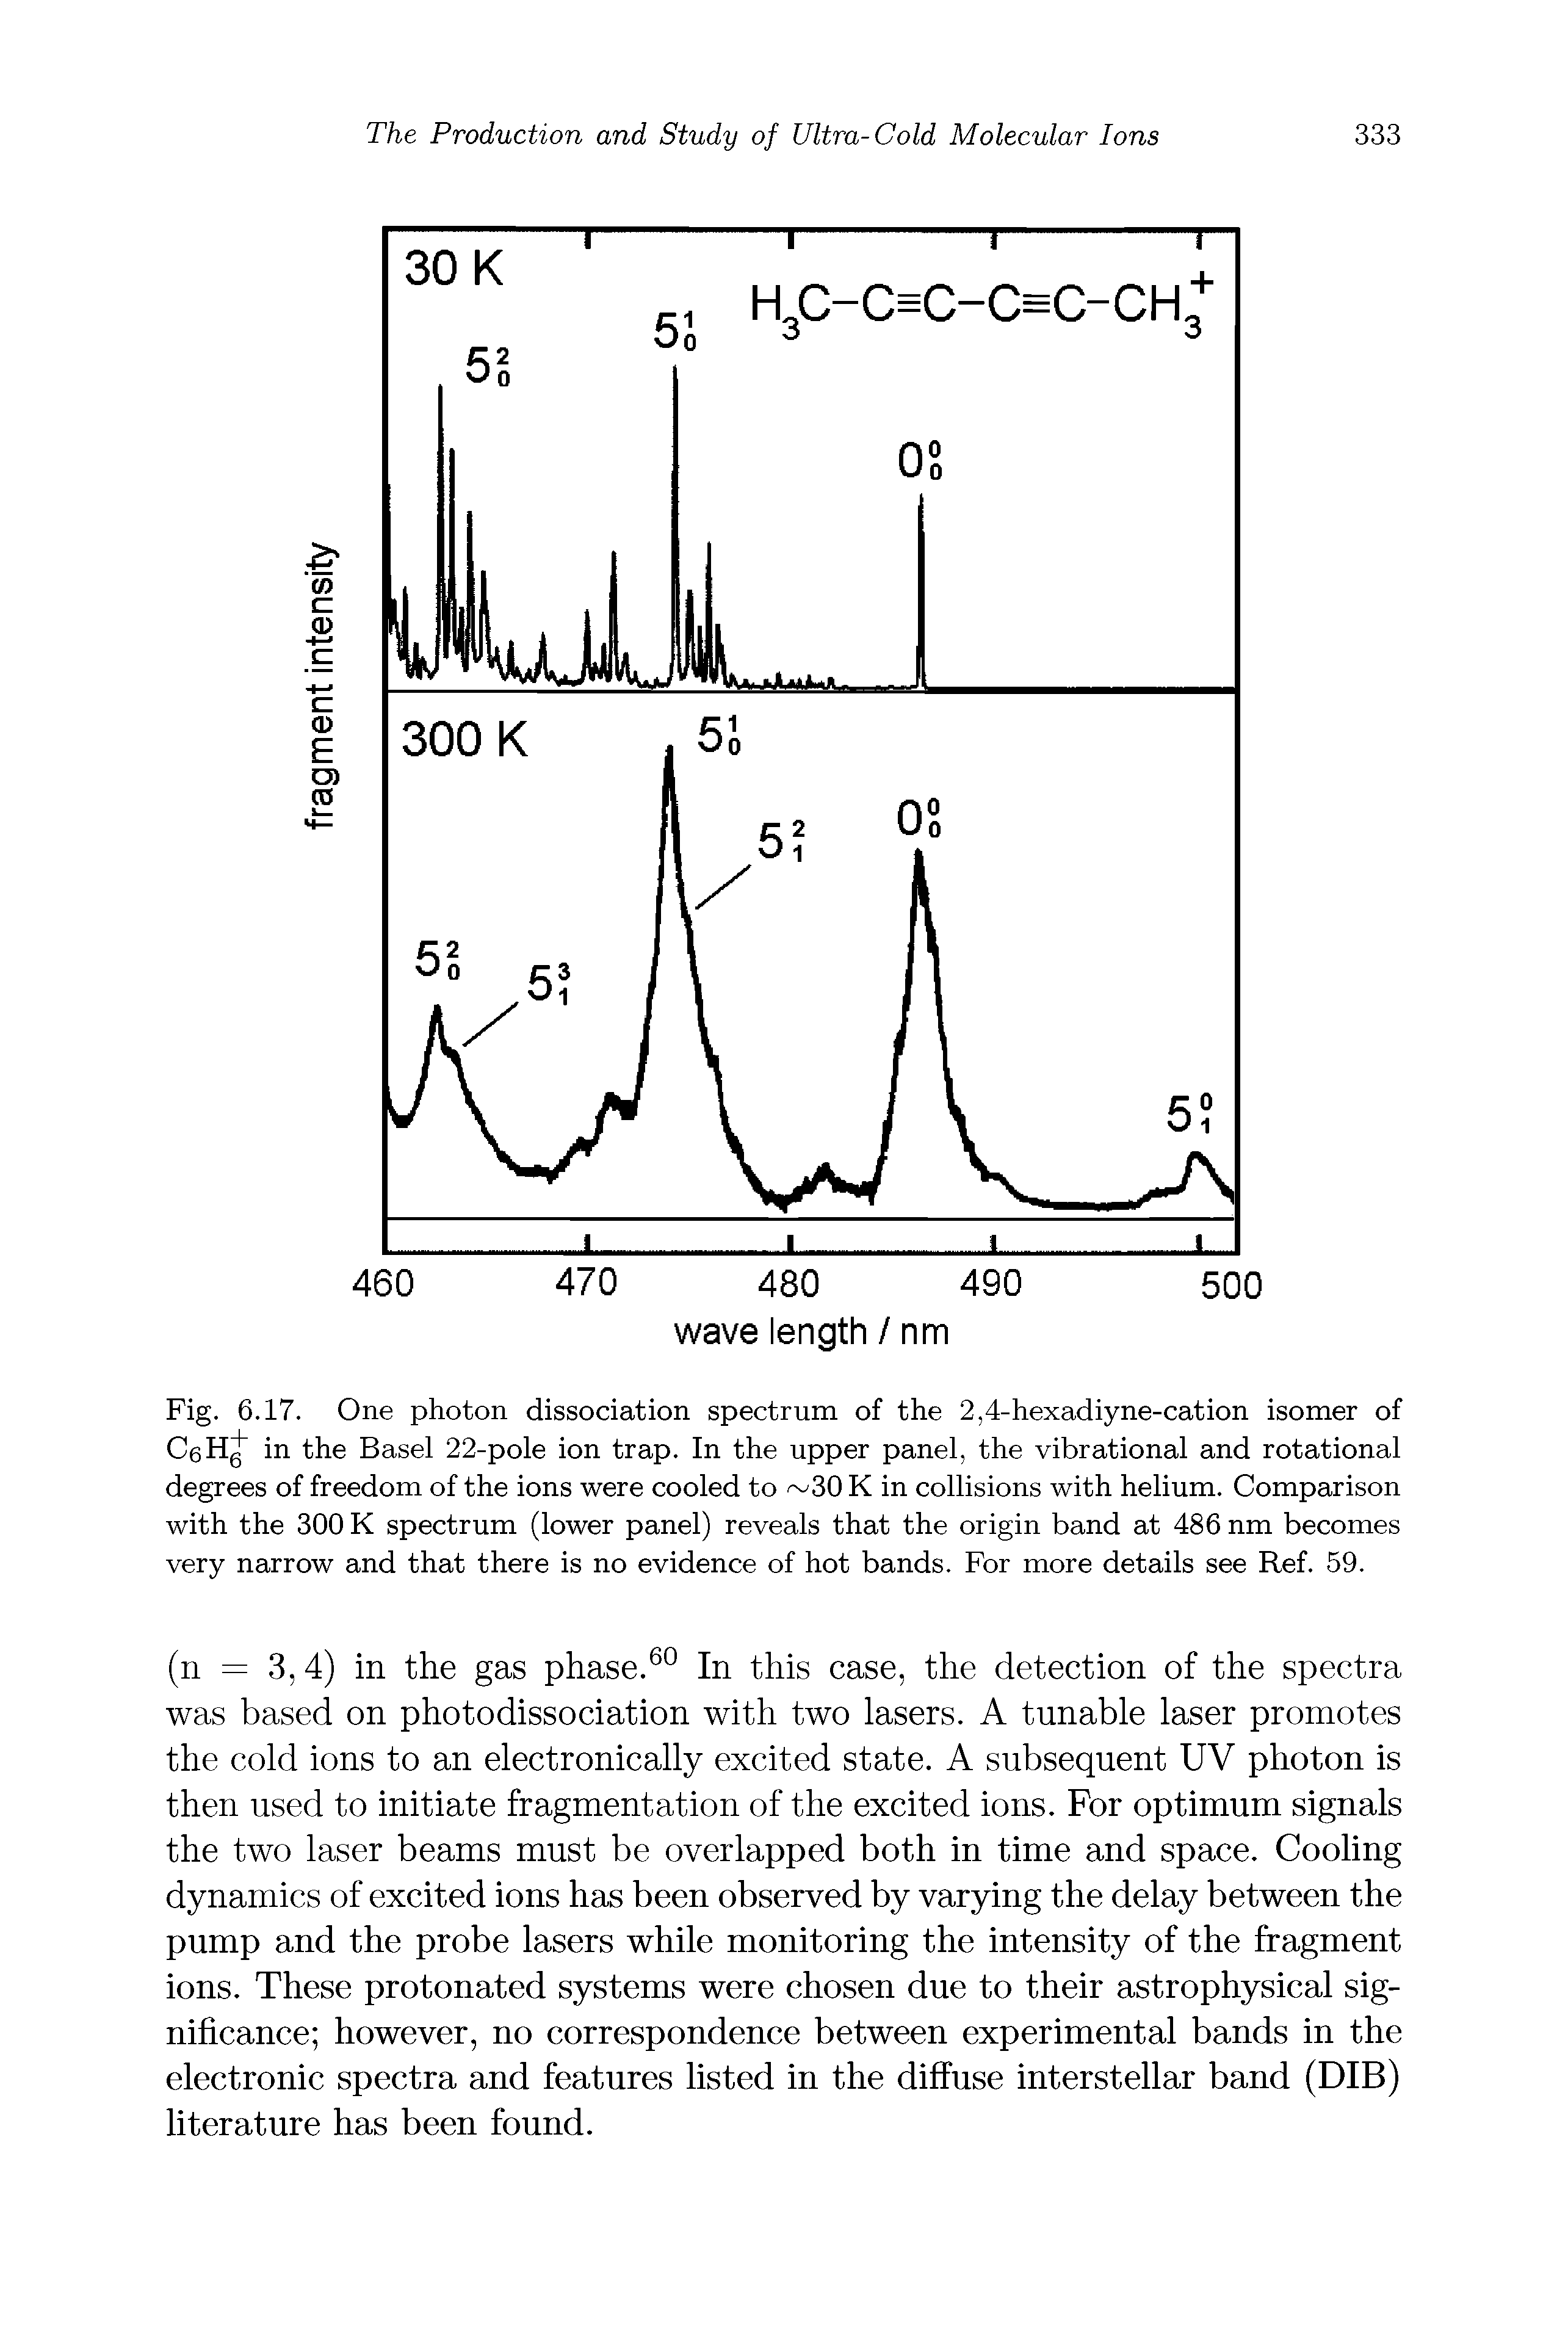 Fig. 6.17. One photon dissociation spectrum of the 2,4-hexadiyne-cation isomer of CeH in the Basel 22-pole ion trap. In the upper panel, the vibrational and rotational degrees of freedom of the ions were cooled to 30 K in collisions with helium. Comparison with the 300 K spectrum (lower panel) reveals that the origin band at 486 nm becomes very narrow and that there is no evidence of hot bands. For more details see Ref. 59.